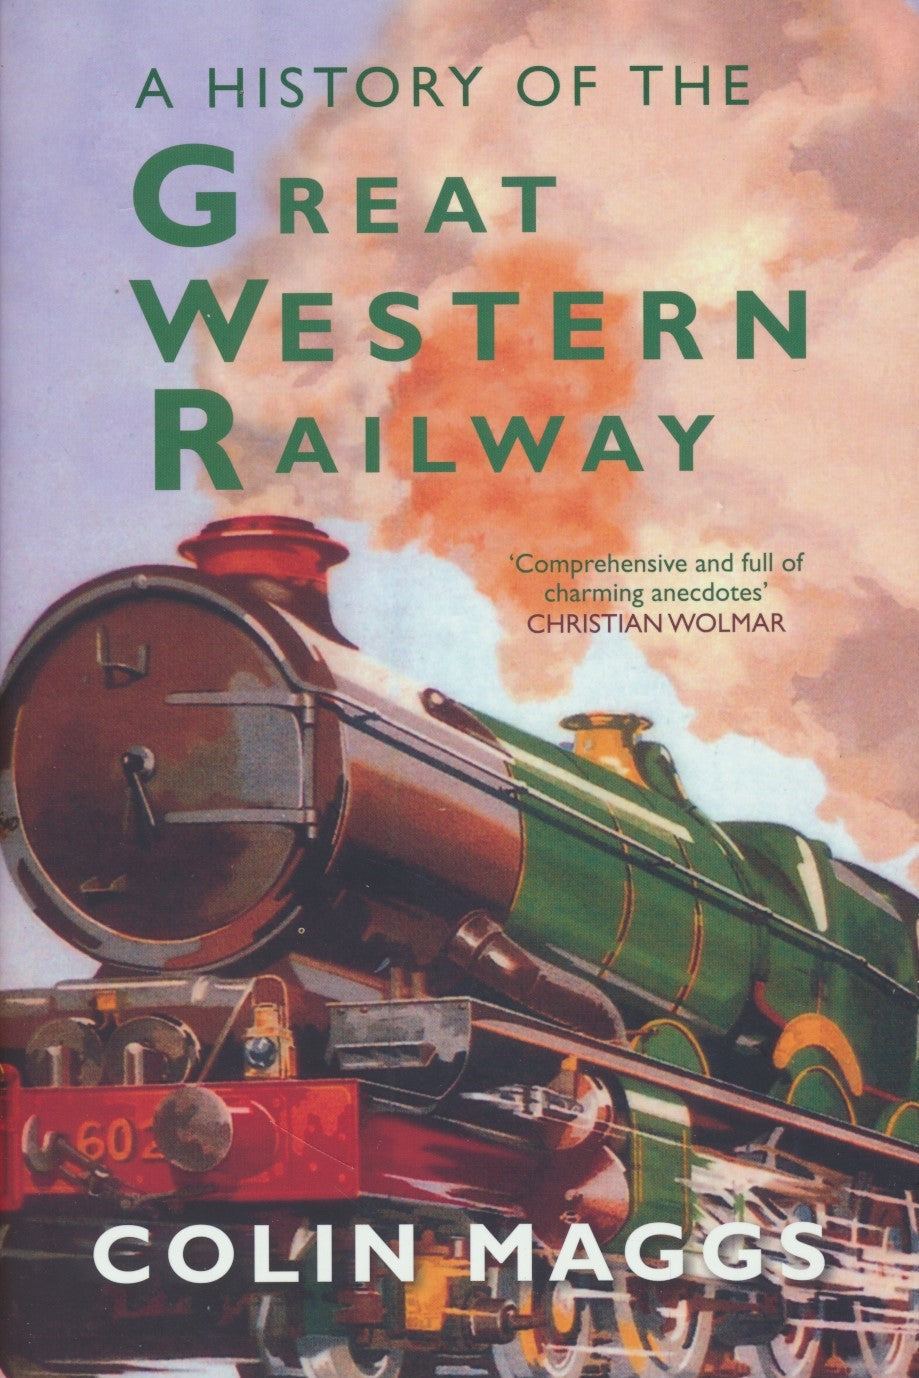 A History of the Great Western Railway